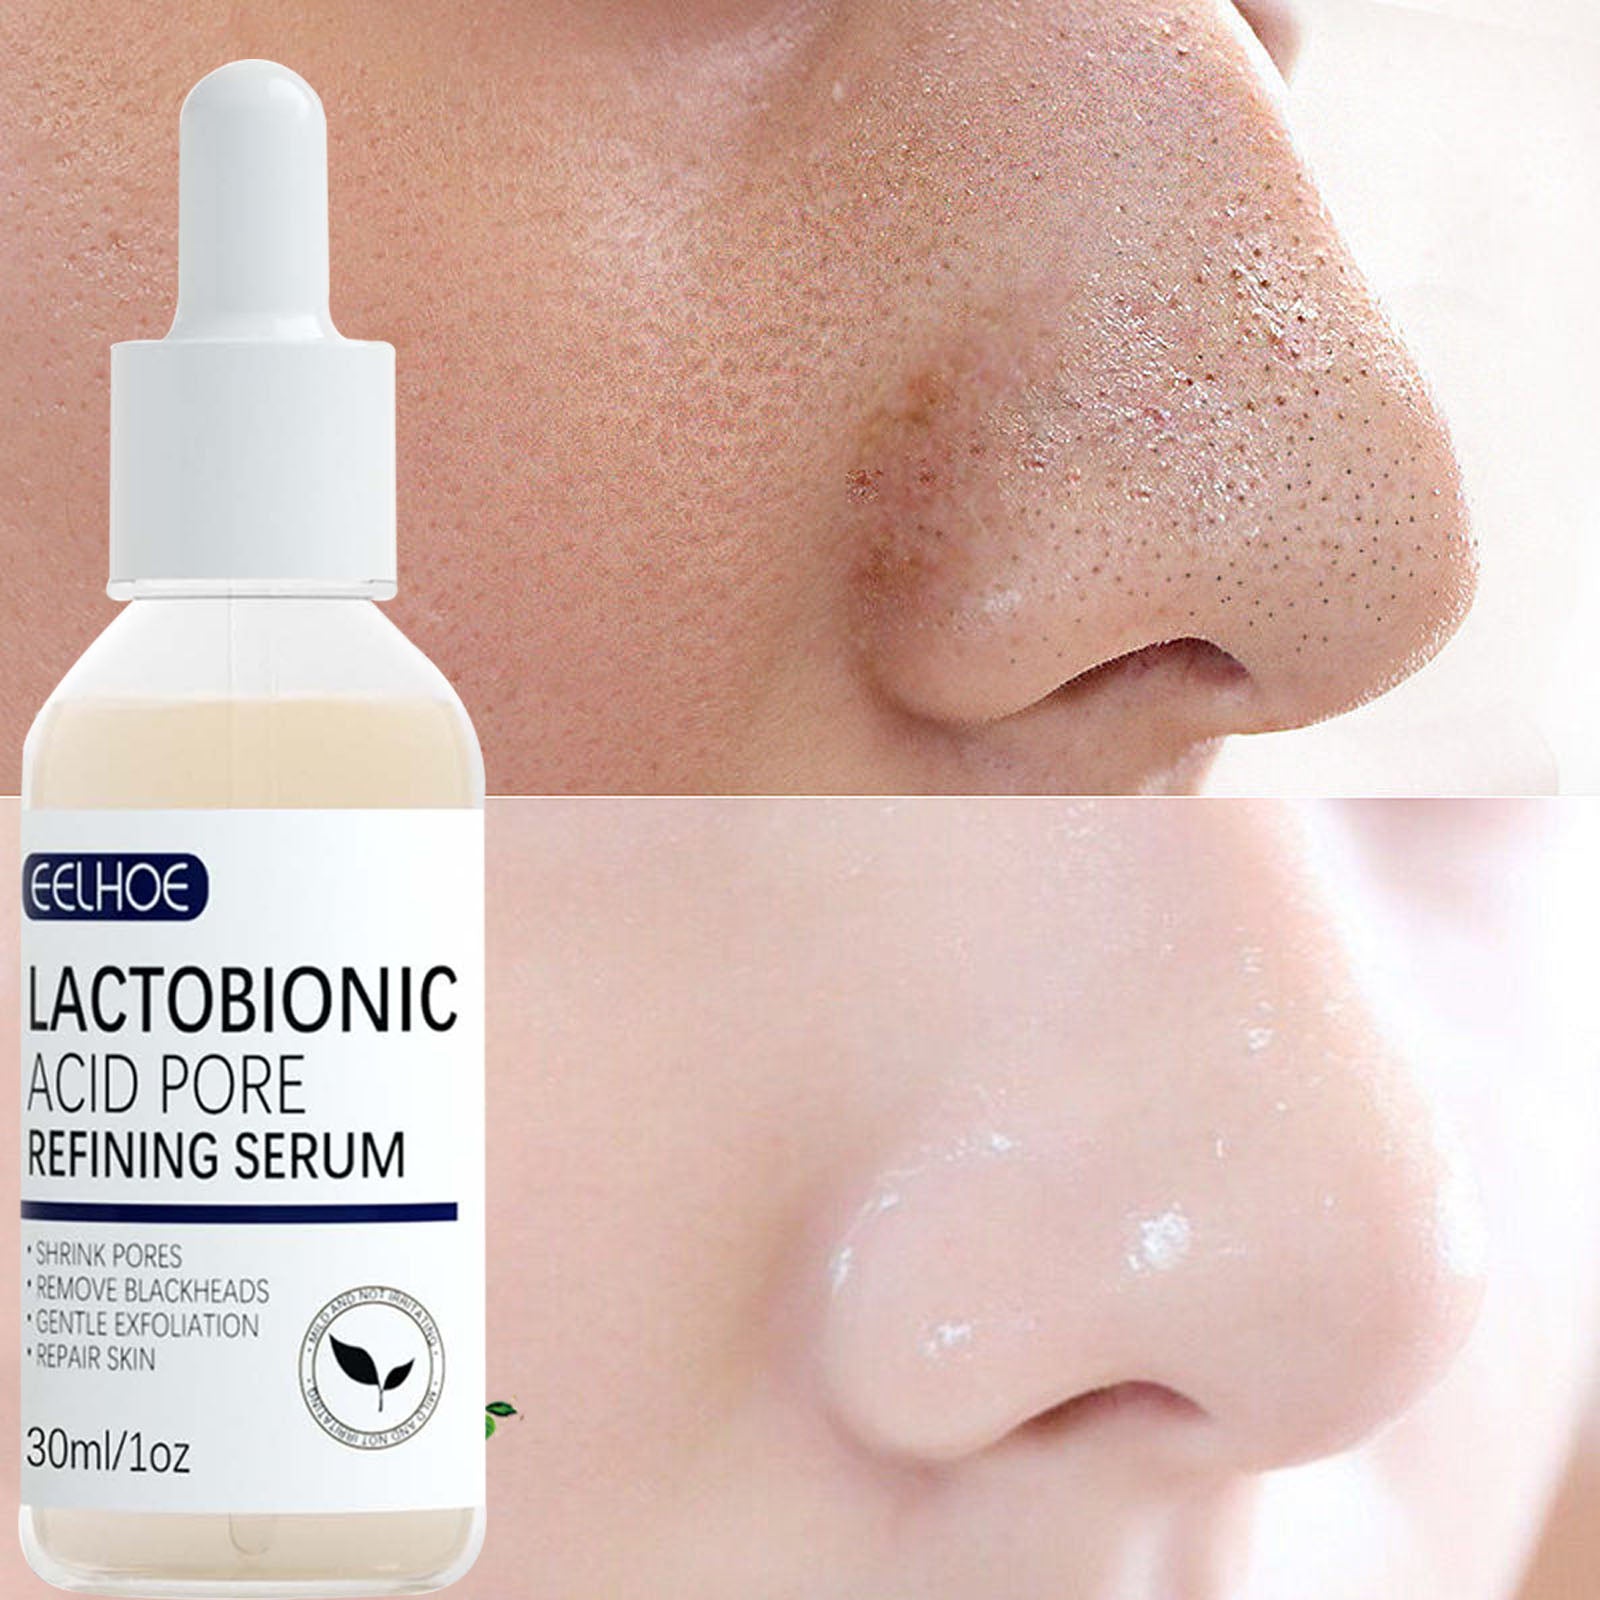 Lactobionic Acid Pore Shrink Face Serum - Hyaluronic Acid Moisturizer for Nourished, Smooth, and Firm Skin